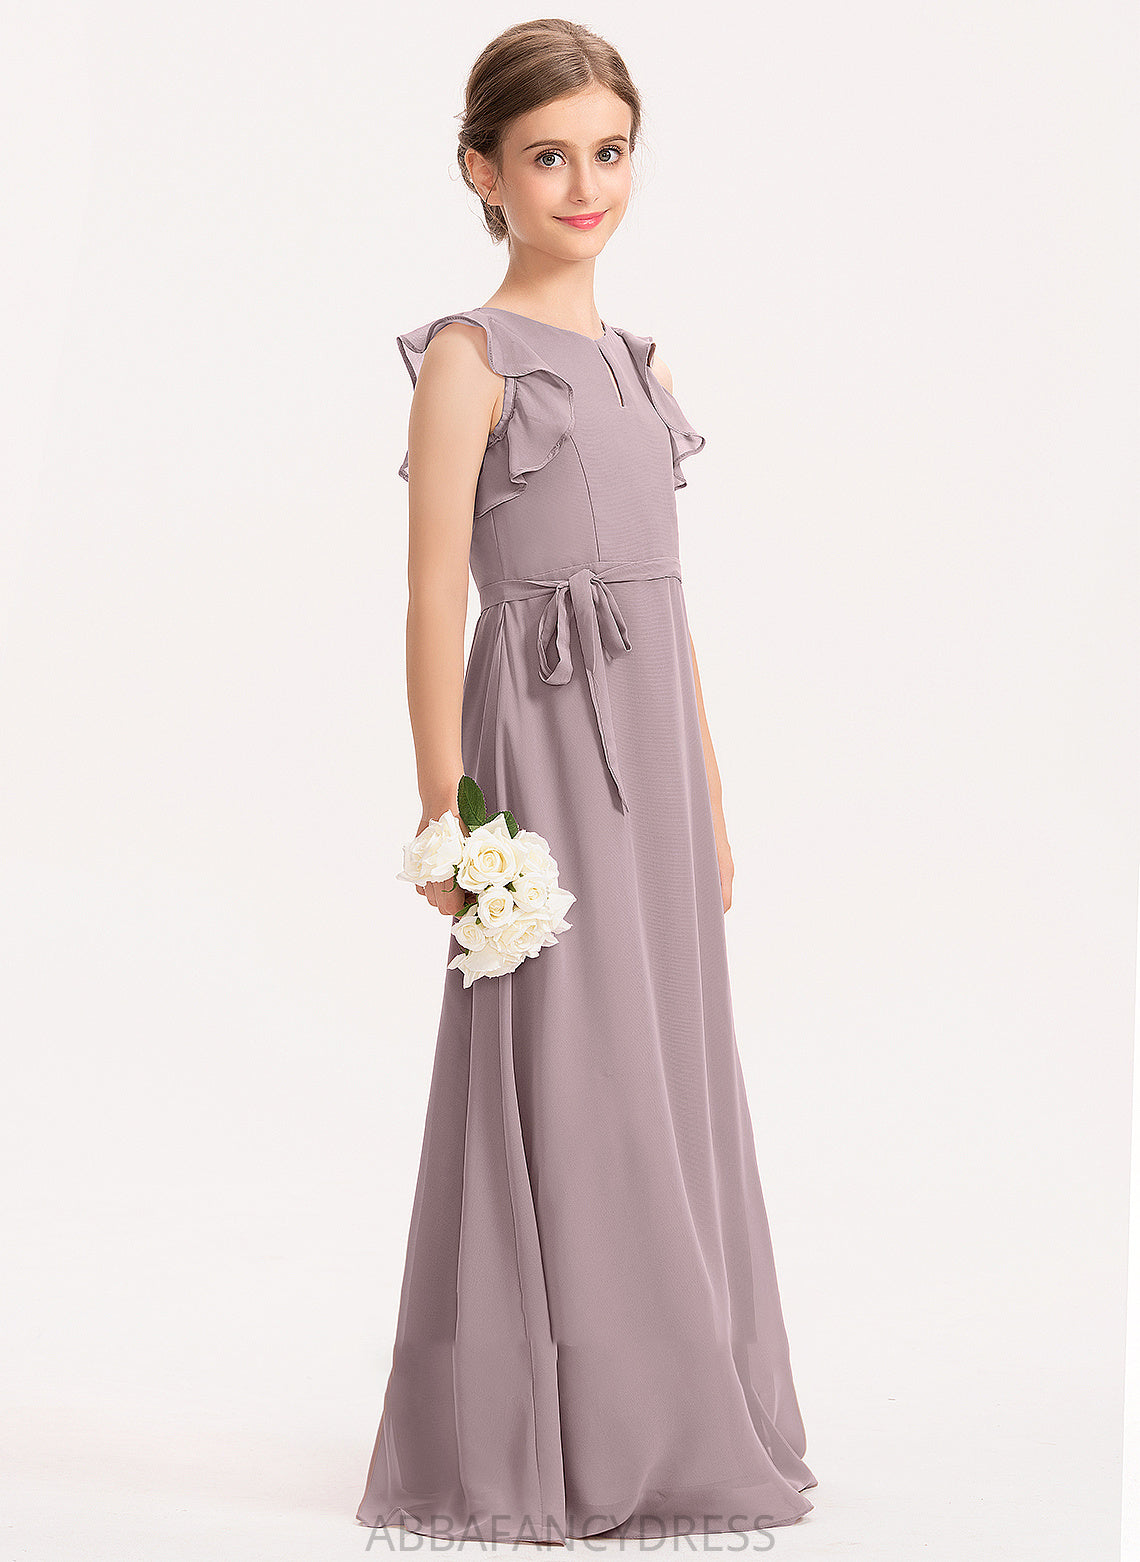 A-Line Ruffles With Neck Floor-Length Chiffon Junior Bridesmaid Dresses Zion Cascading Scoop Bow(s)